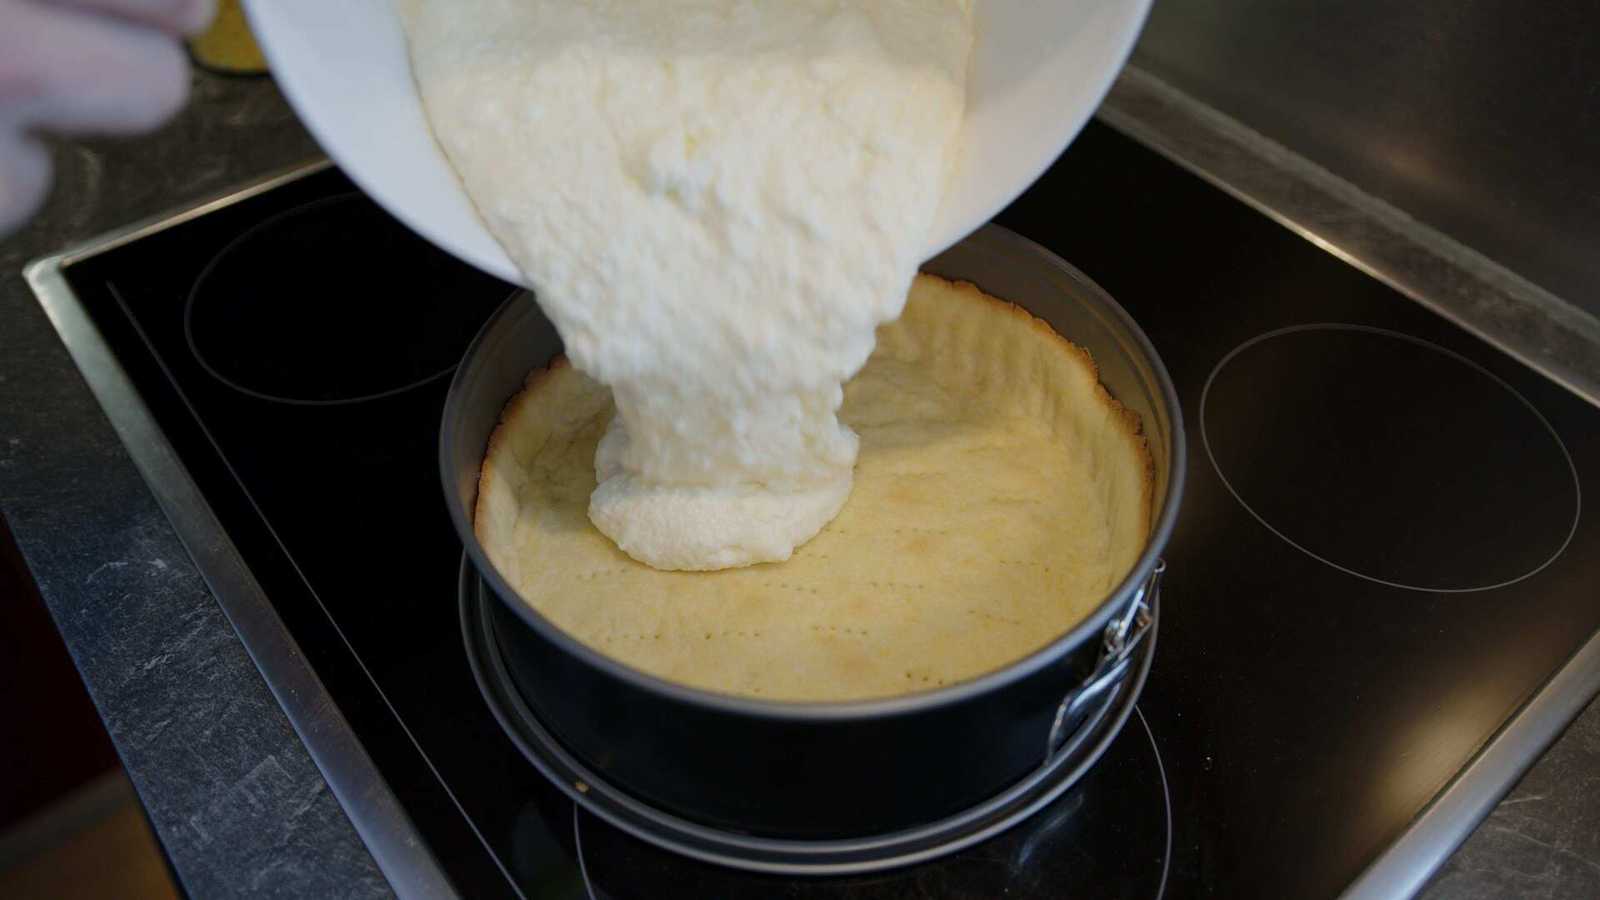 Filling the dough with the cream